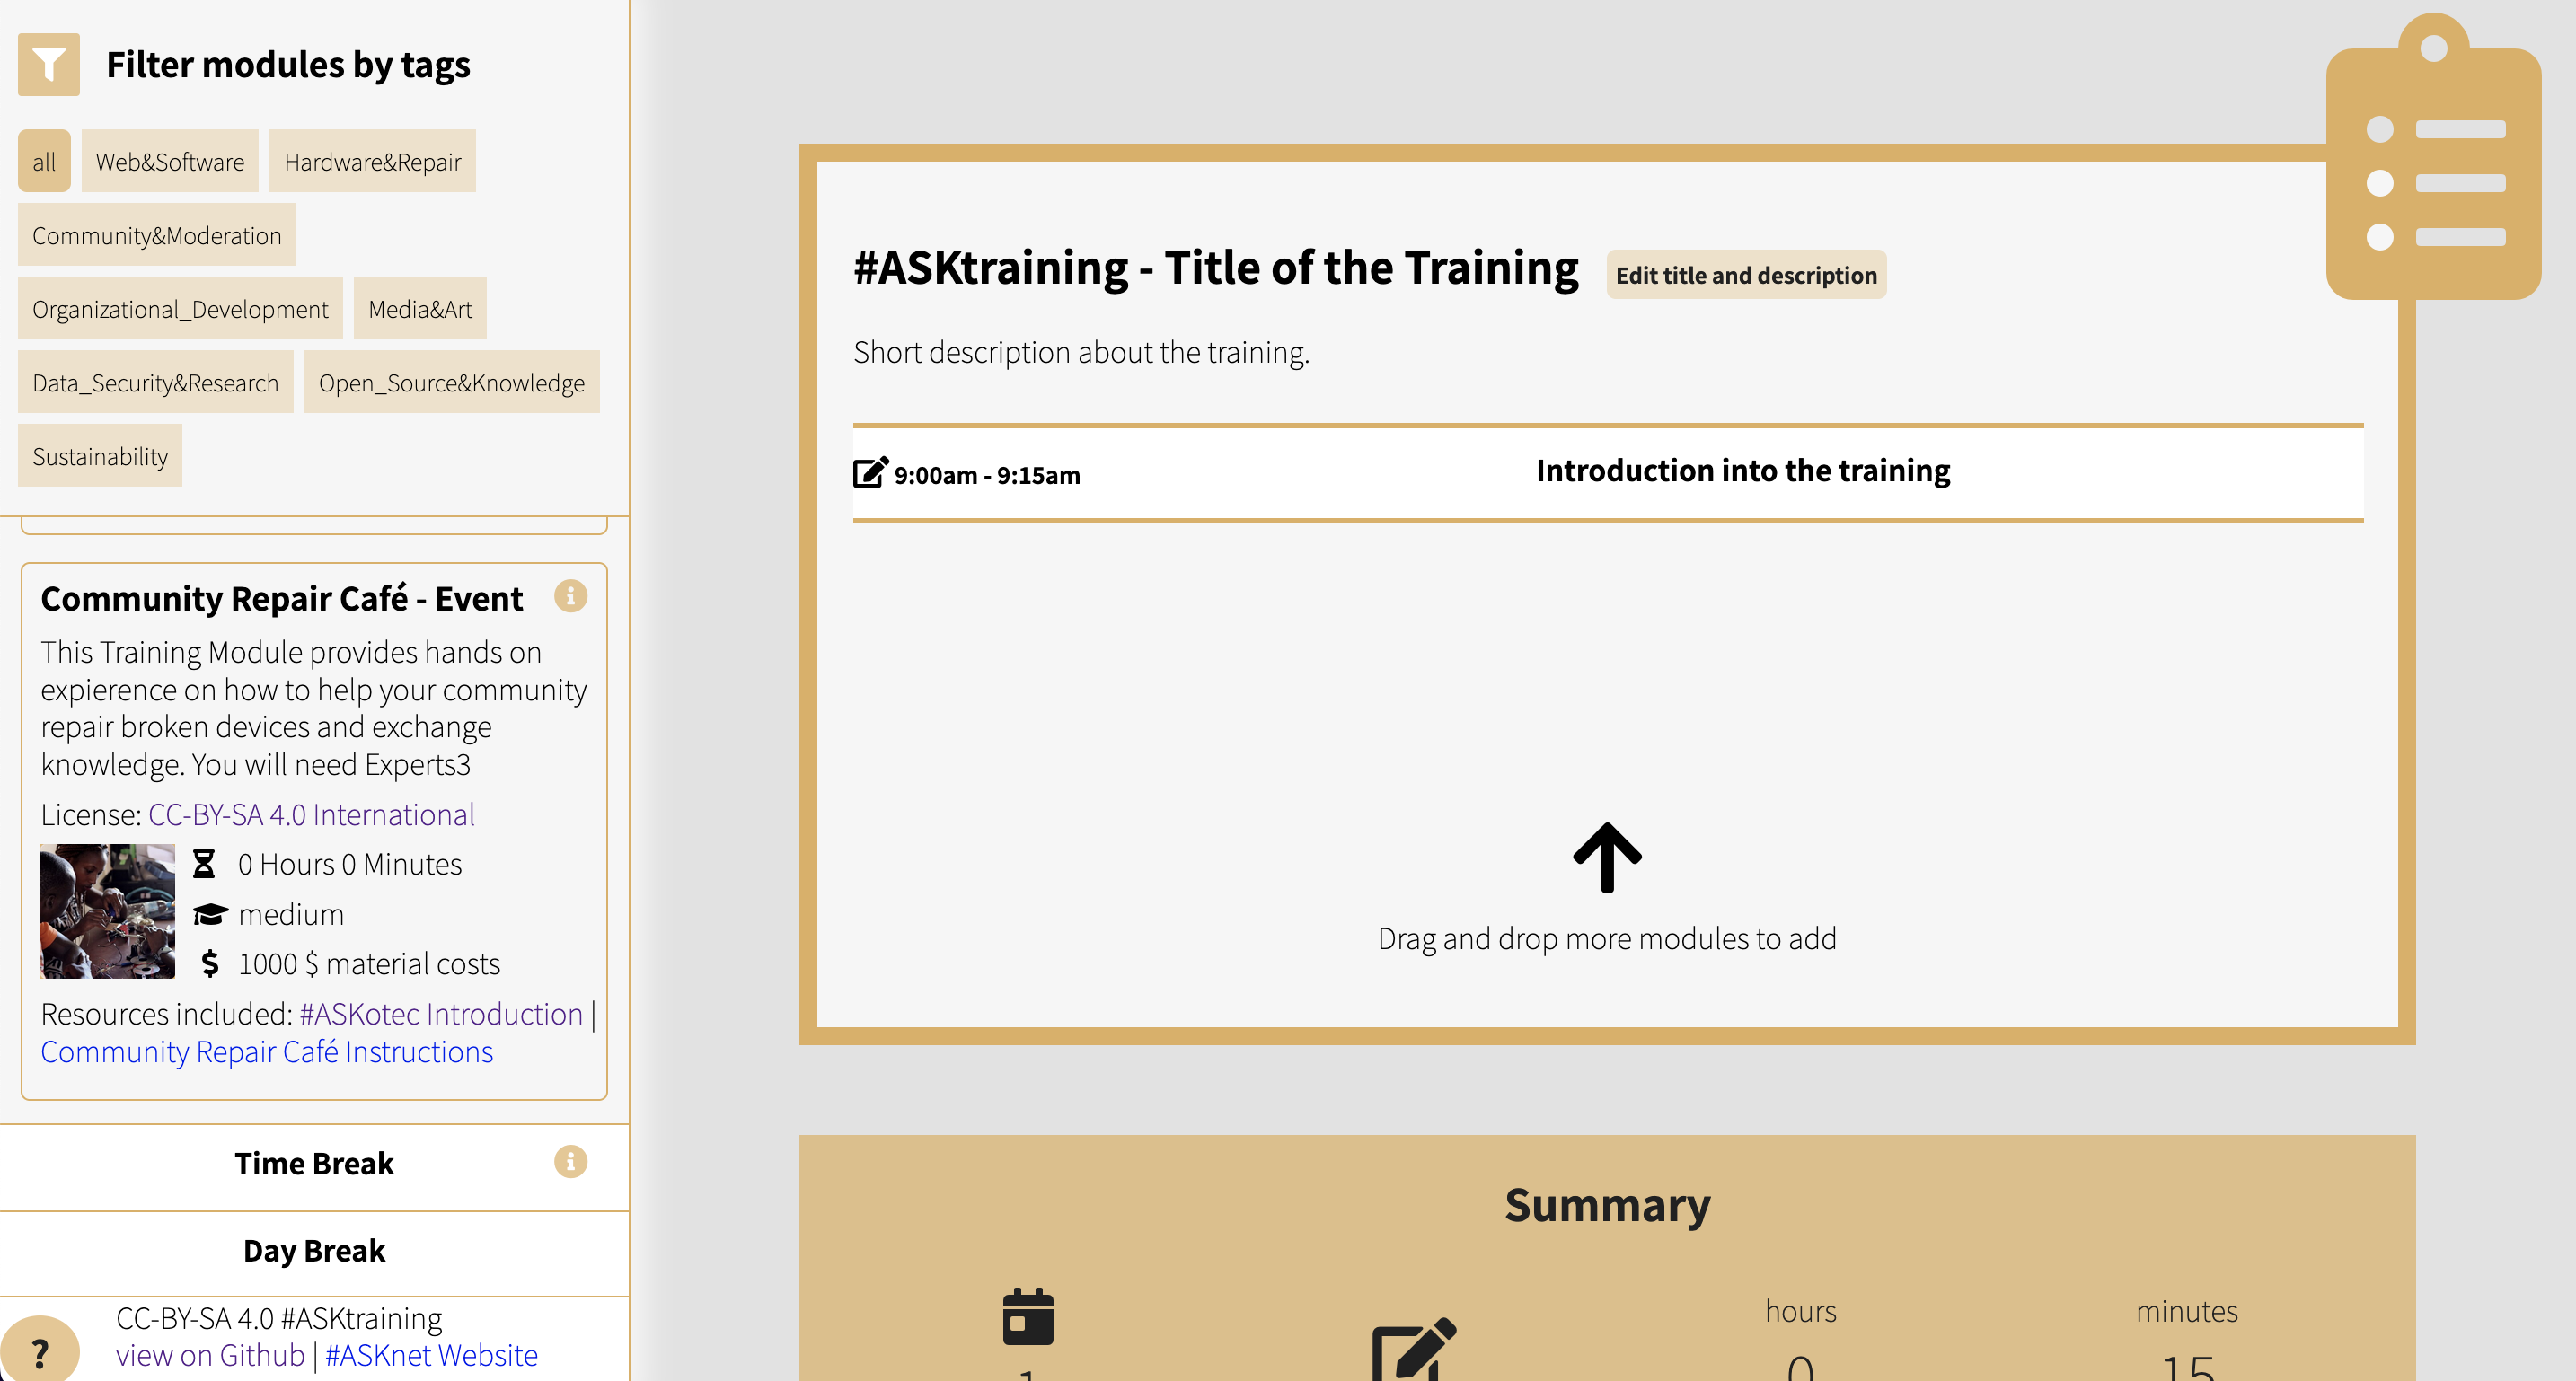 The Integration of Modules and Resources into #ASKtraining